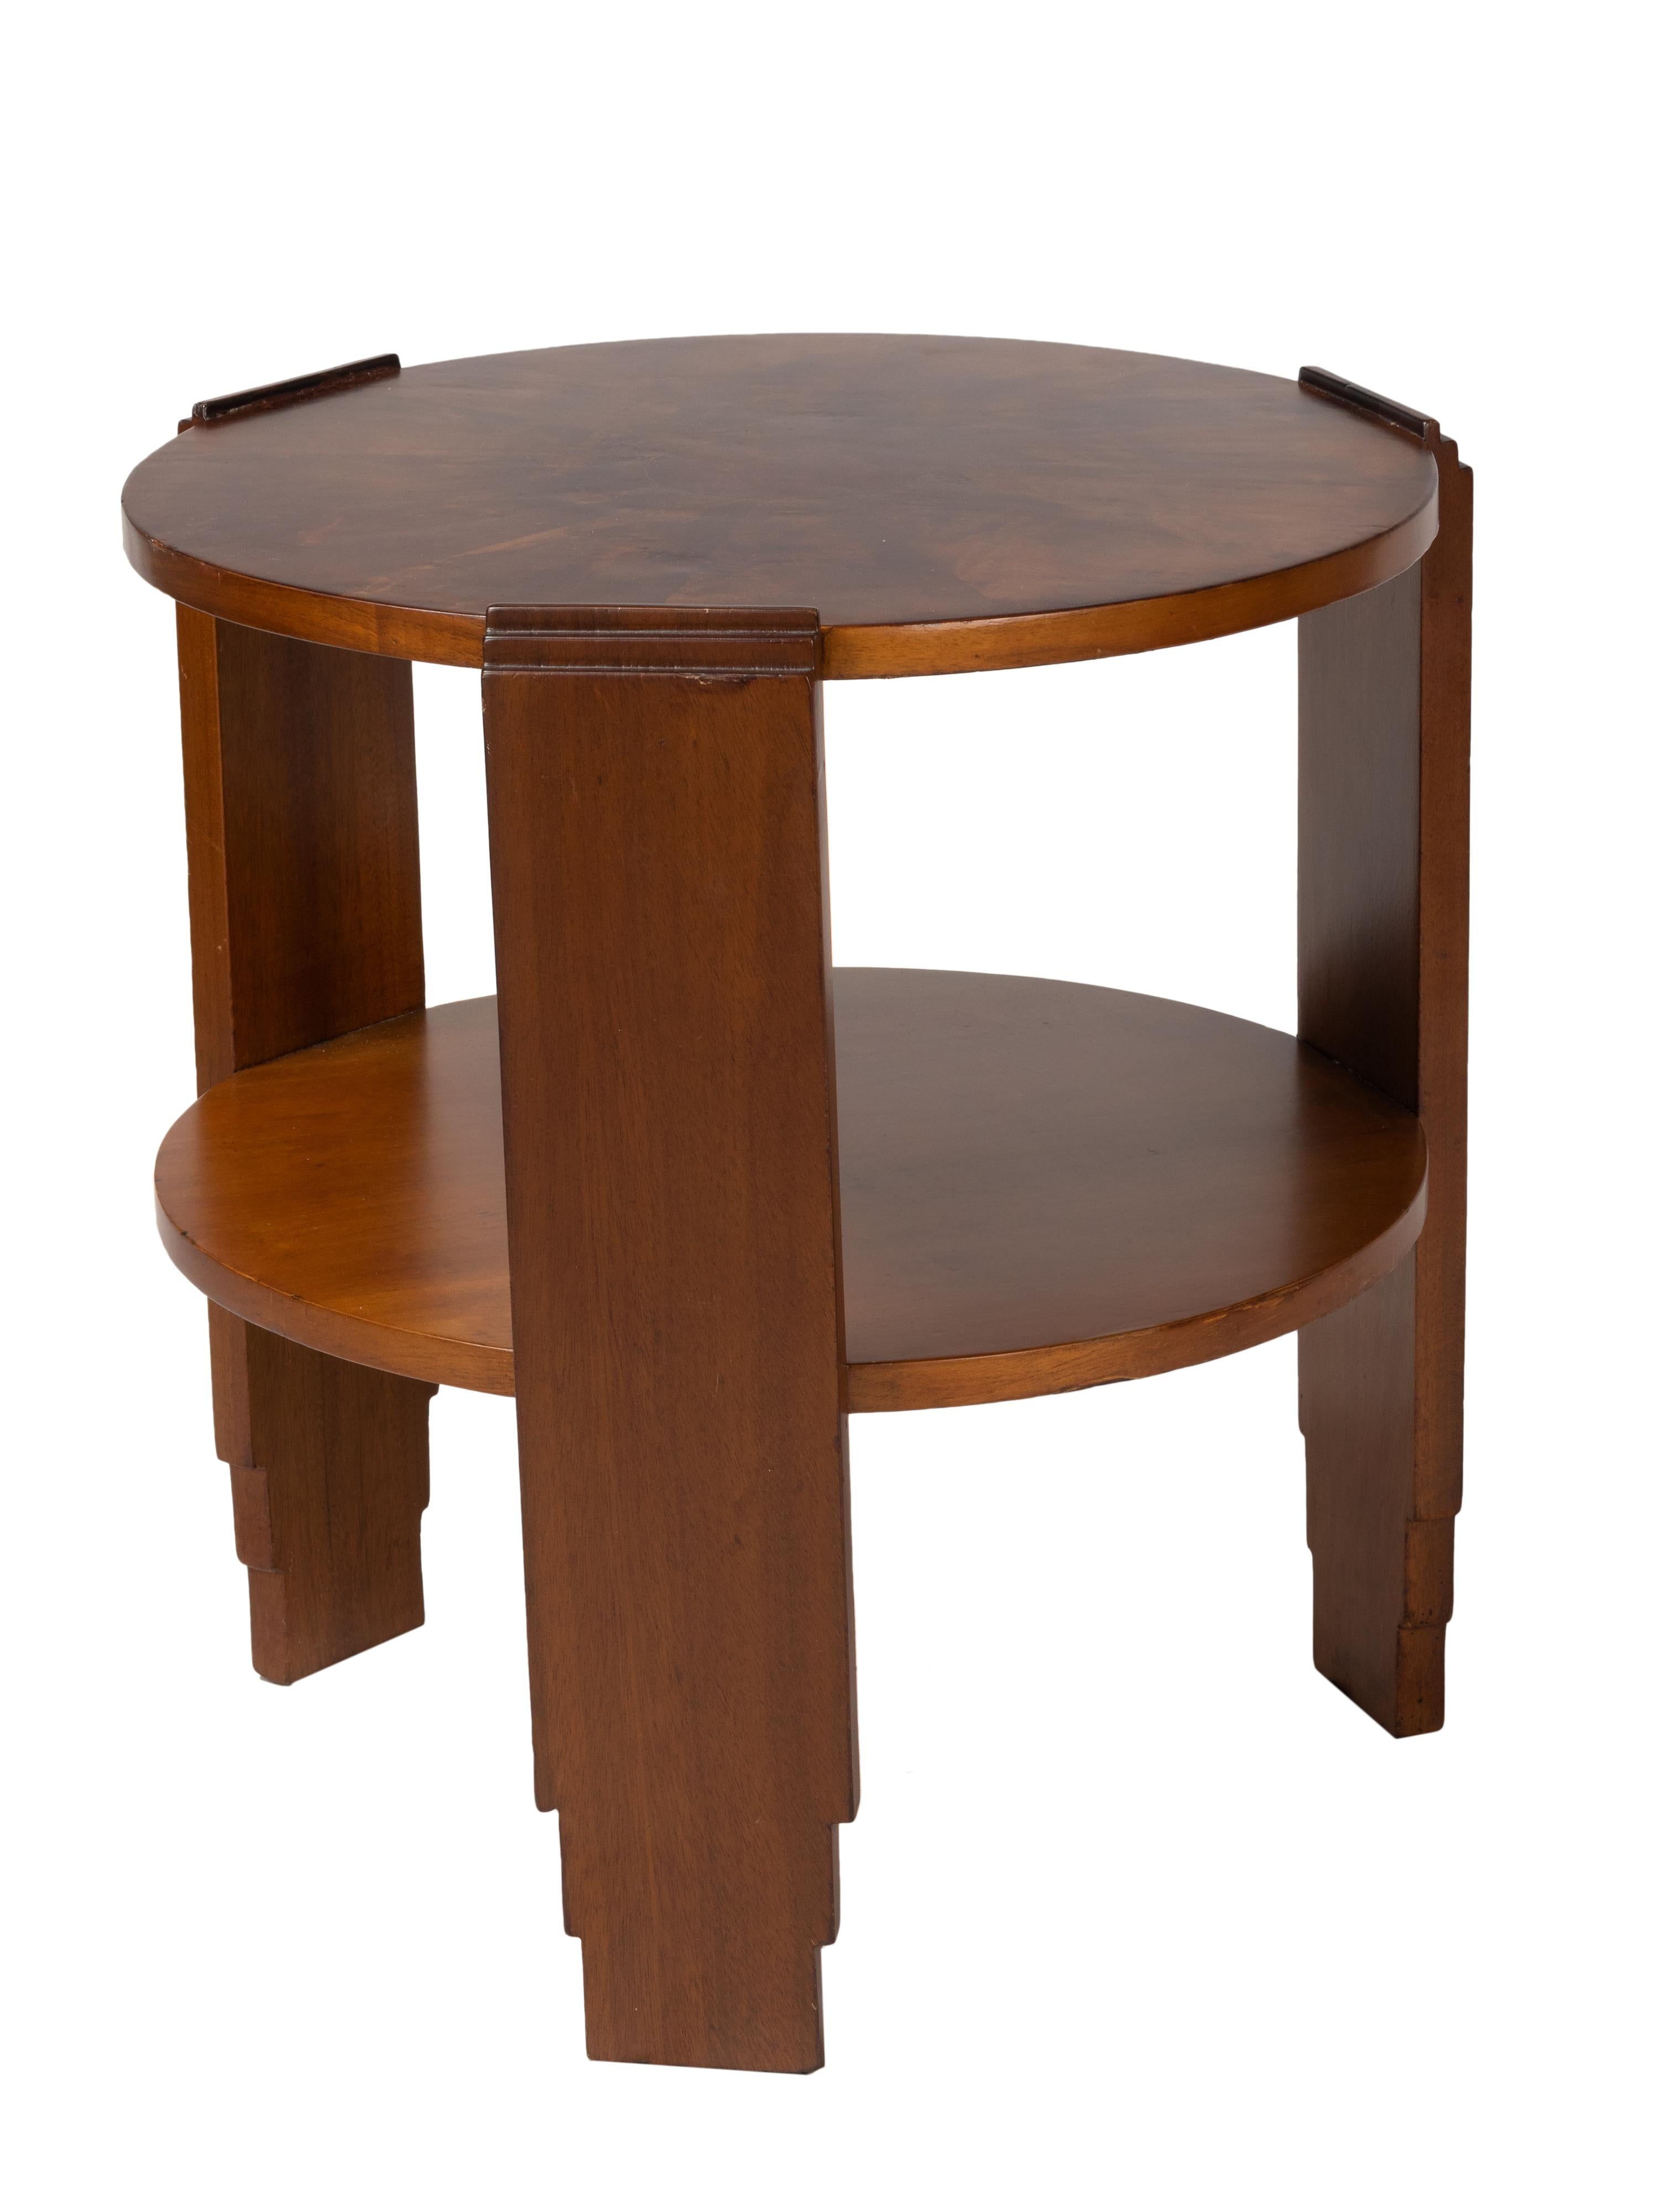 20th Century Walnut Art Deco Center Table  In Good Condition For Sale In Lisbon, PT